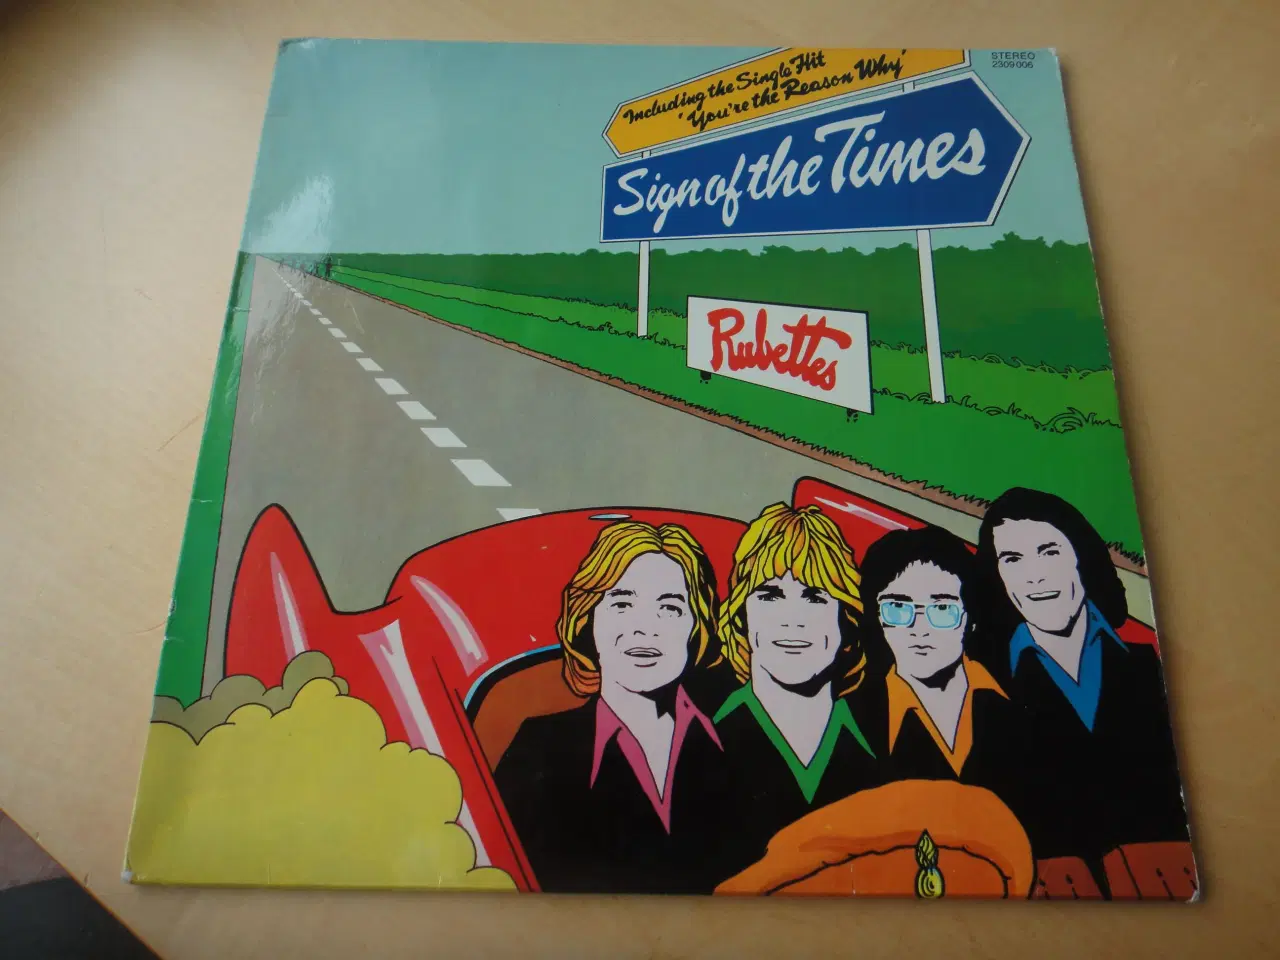 Billede 1 - LP - Rubettes - Sign of the Times